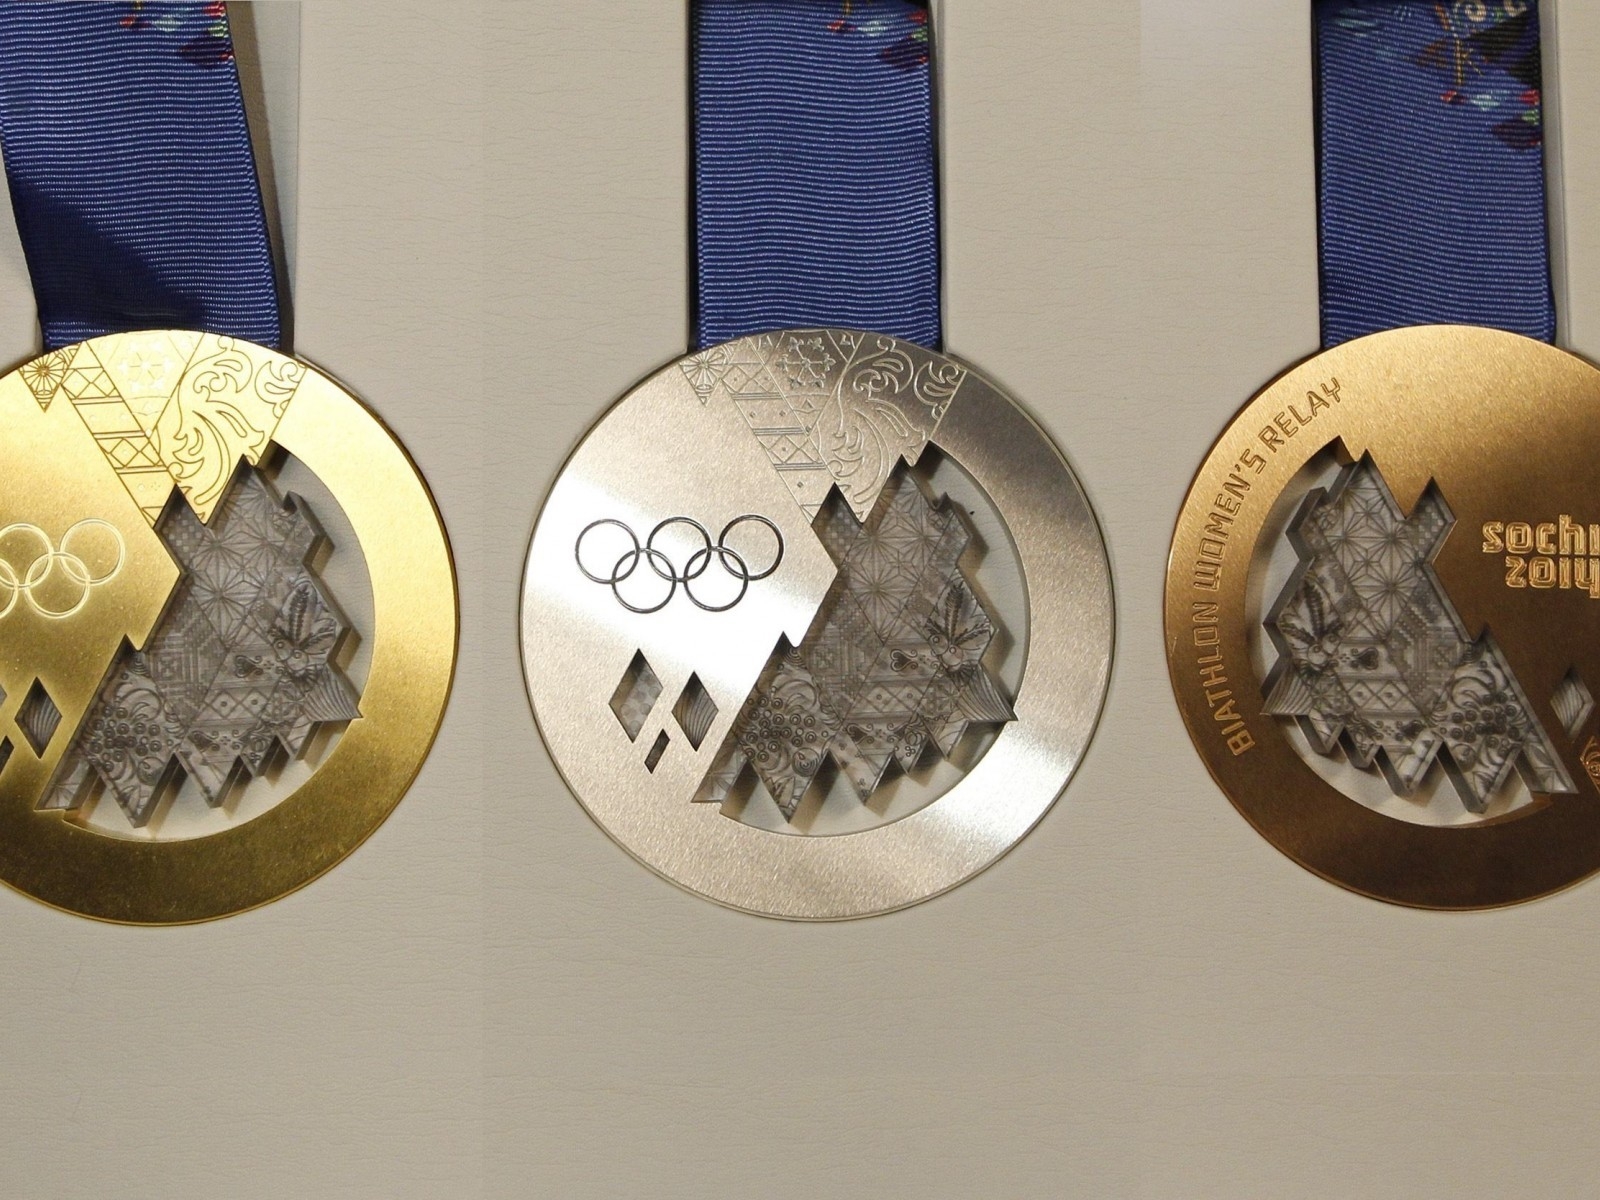 Sochi 2014 Medals for 1600 x 1200 resolution